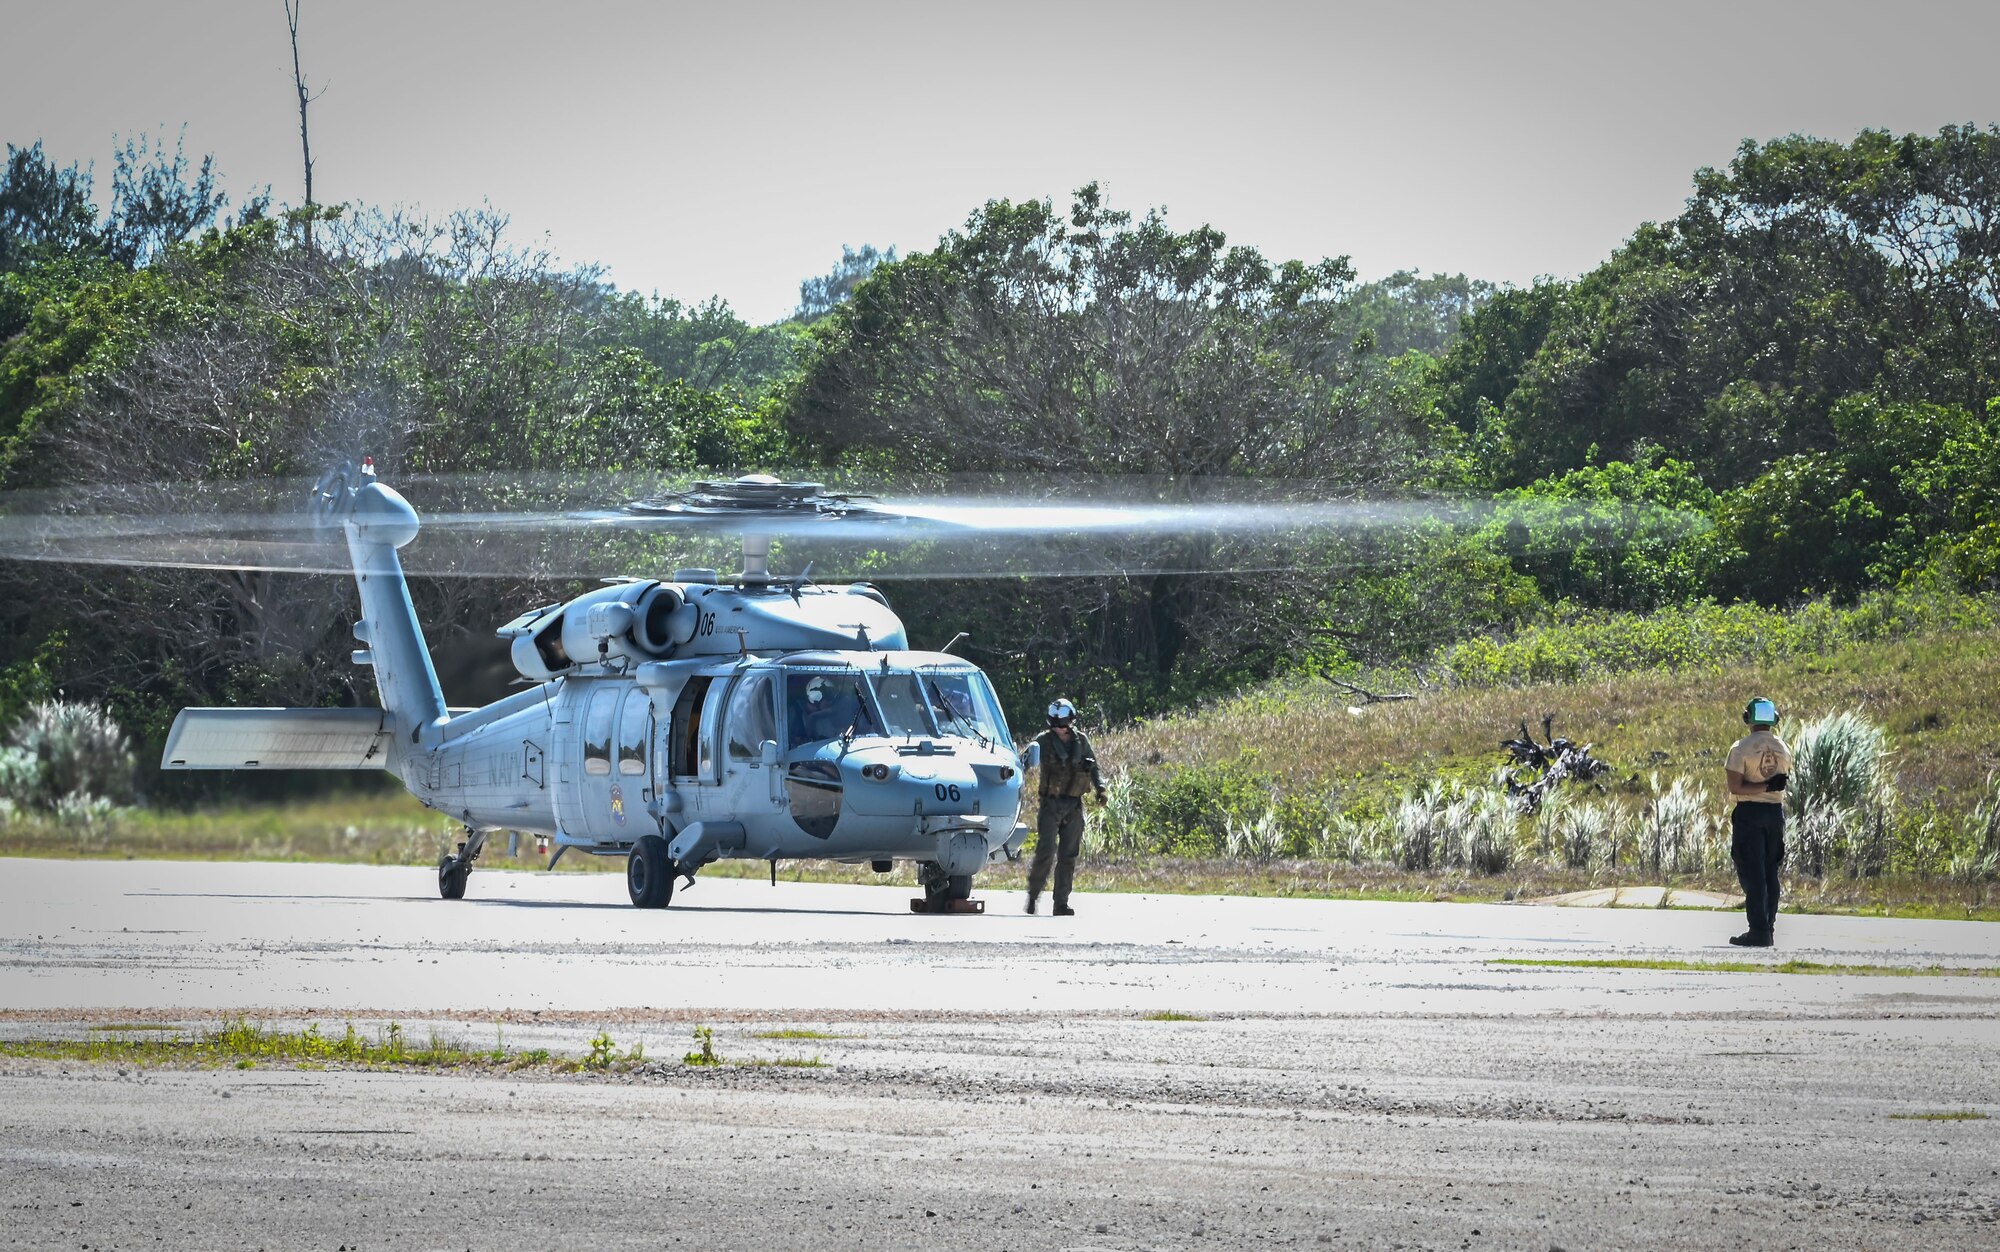 U.S. Navy personnel assigned to the Helicopter Sea Combat Squadron 25, prepares a MH-60S Knighthawk for take off on Northwest Field during a joint field training exercise at Andersen Air Force Base, Guam, April 29, 2022.